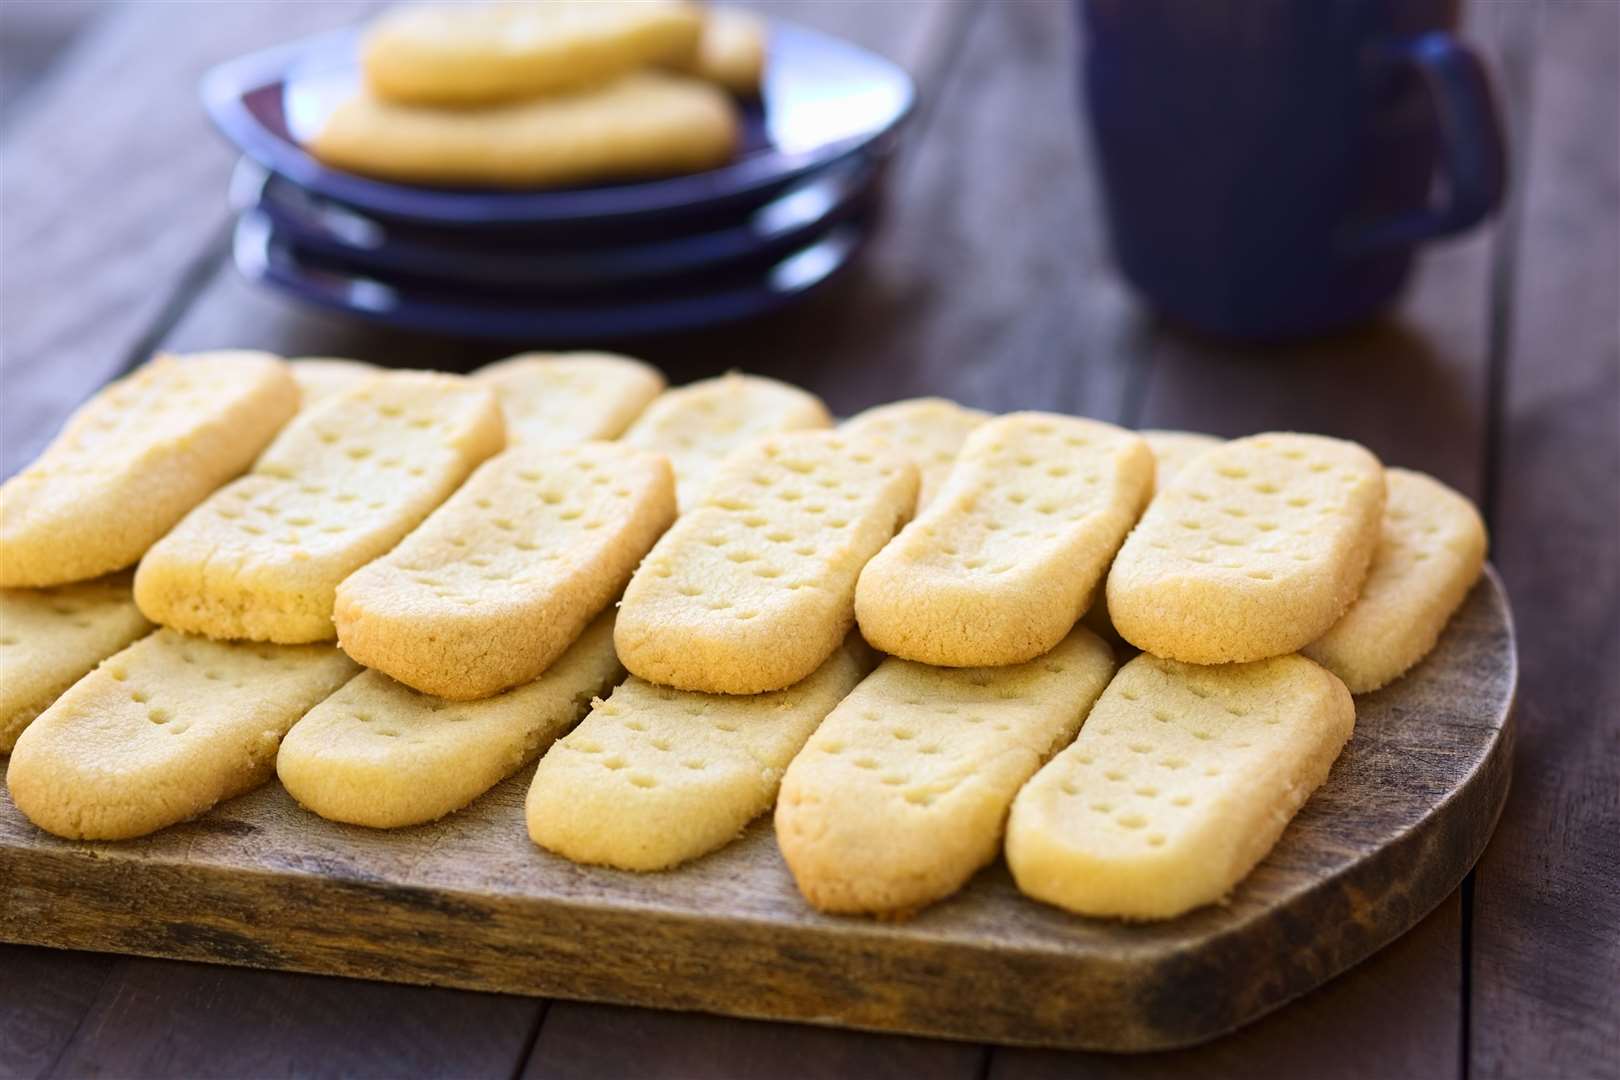 Homebaked shortbread biscuits on wooden board with plates and cup of tea in the back (Selective Focus, Focus on the front of the upper cookies)